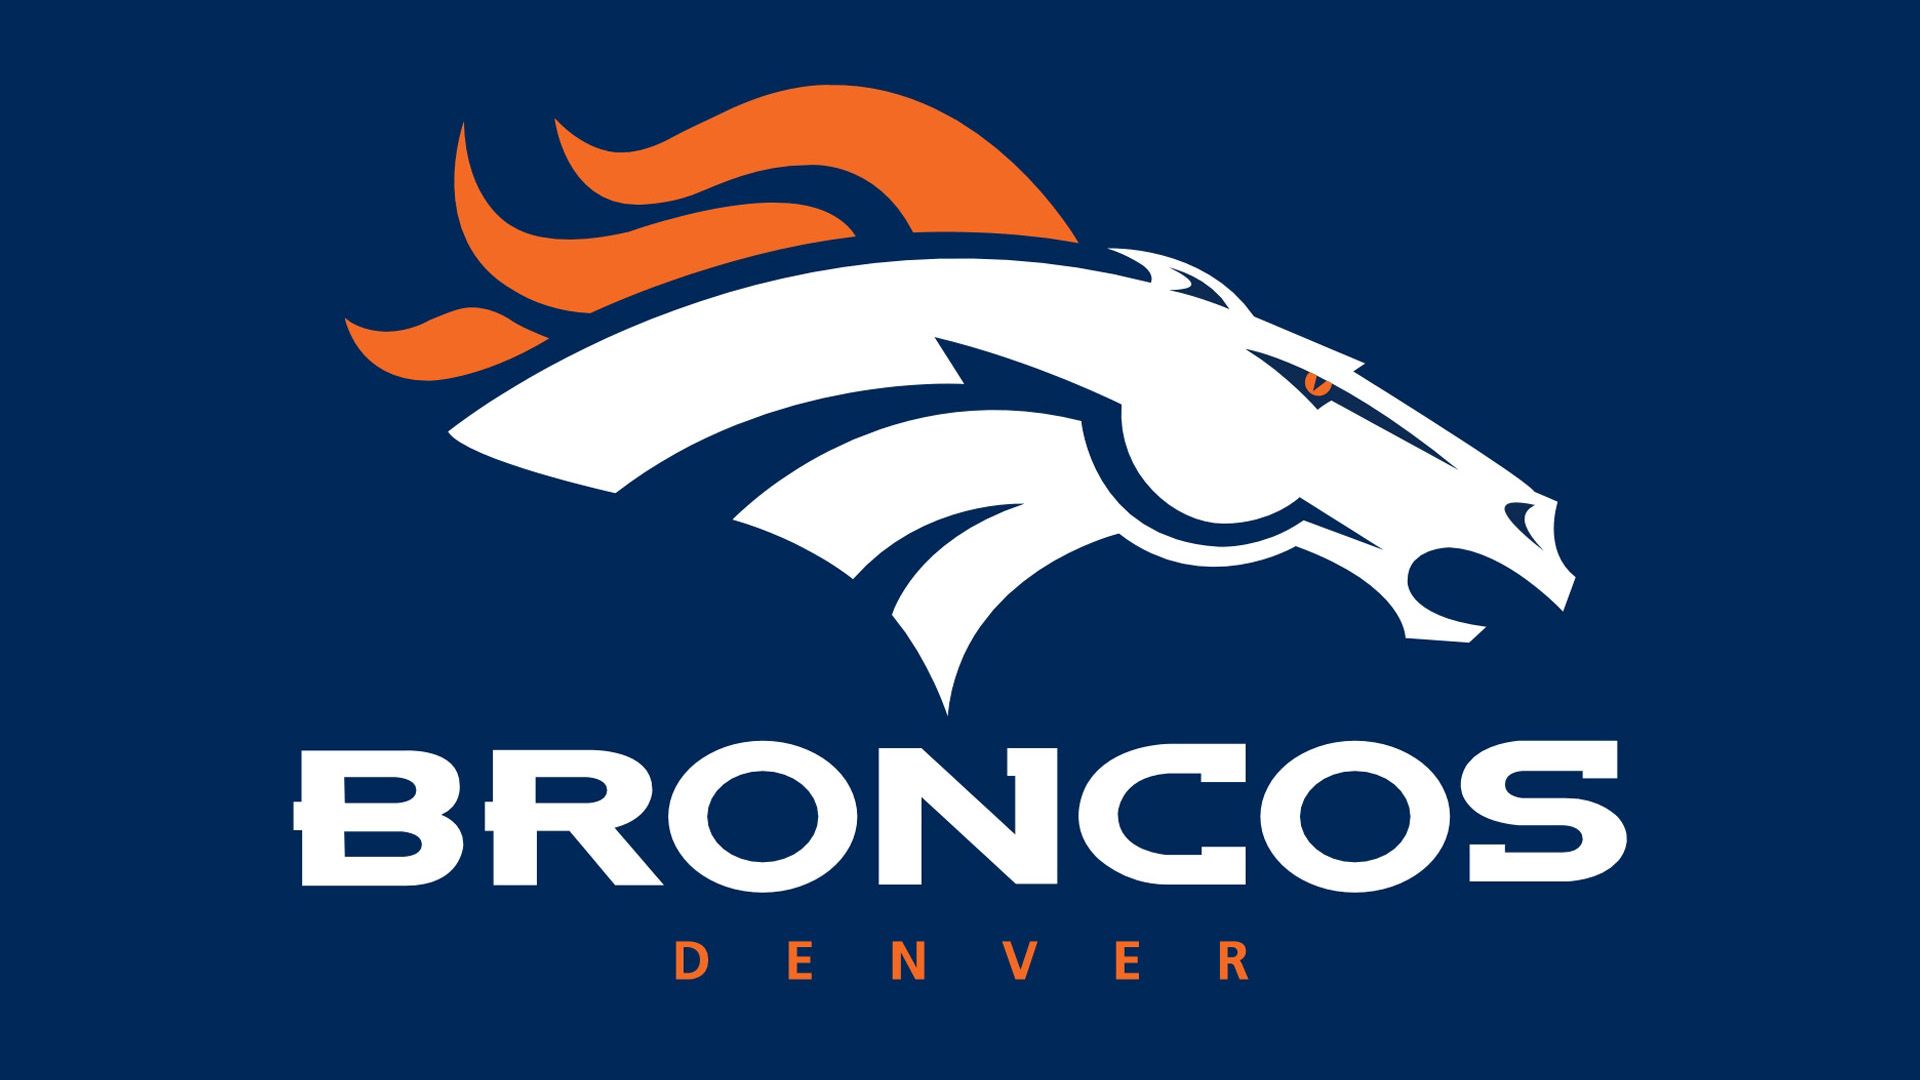 I've been a Broncos fan since the early 90s, back when the Raiders were in LA and used to own them, lol. Denver broncos, Broncos, Denver broncos logo